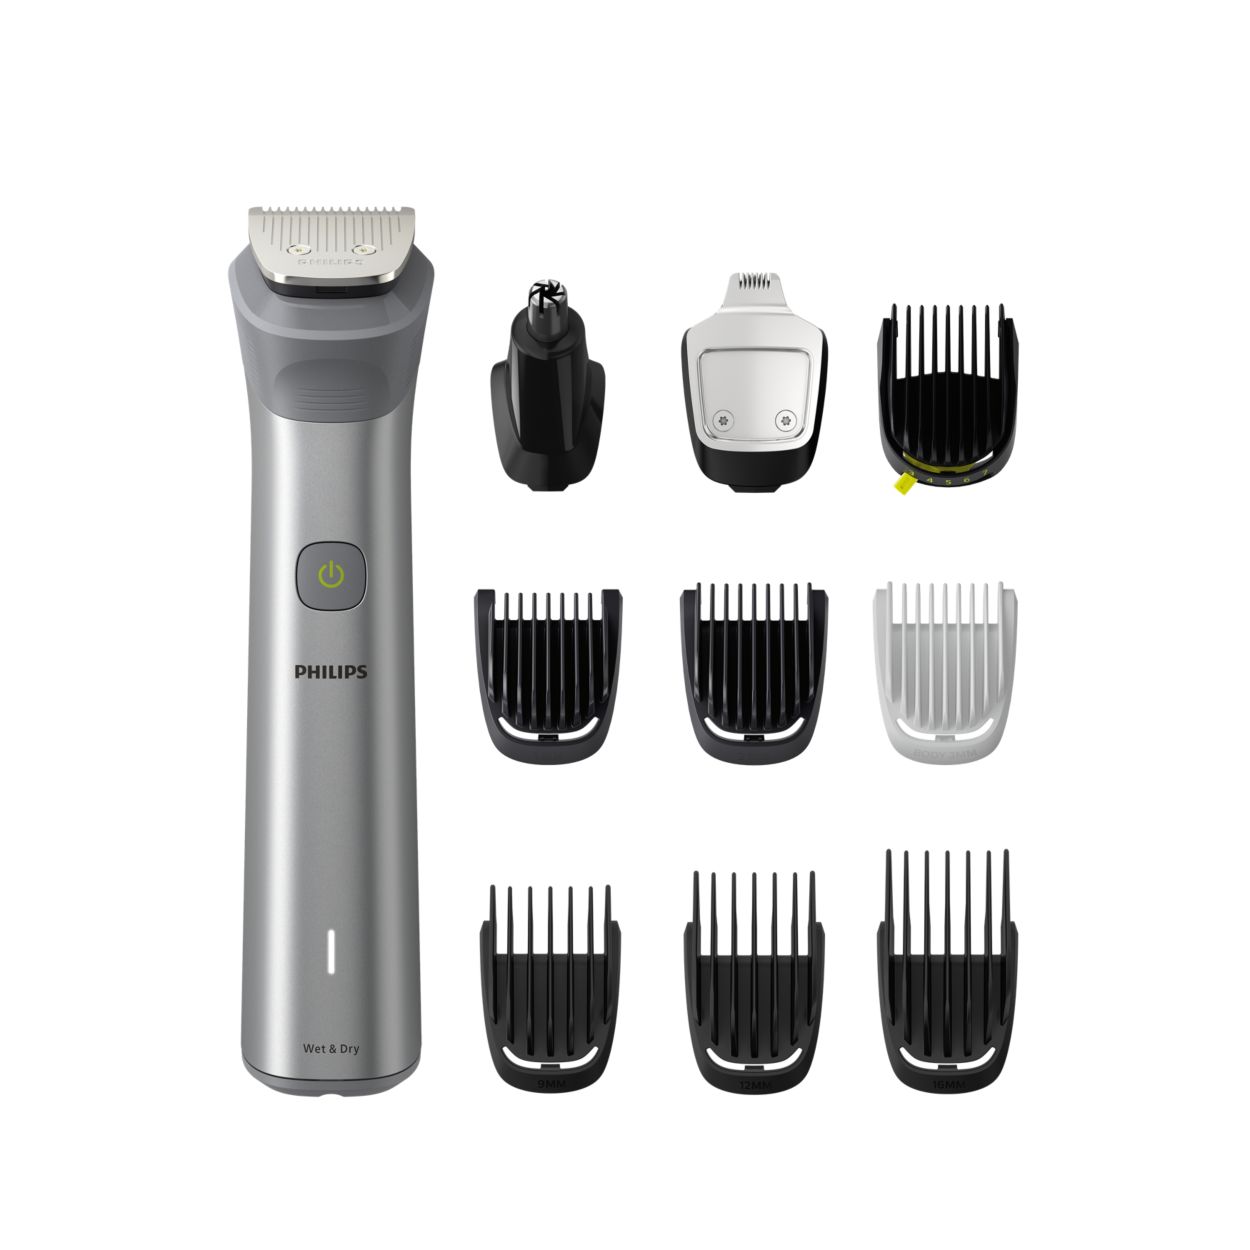 All-in-One Trimmer Series 5000 MG5920/15